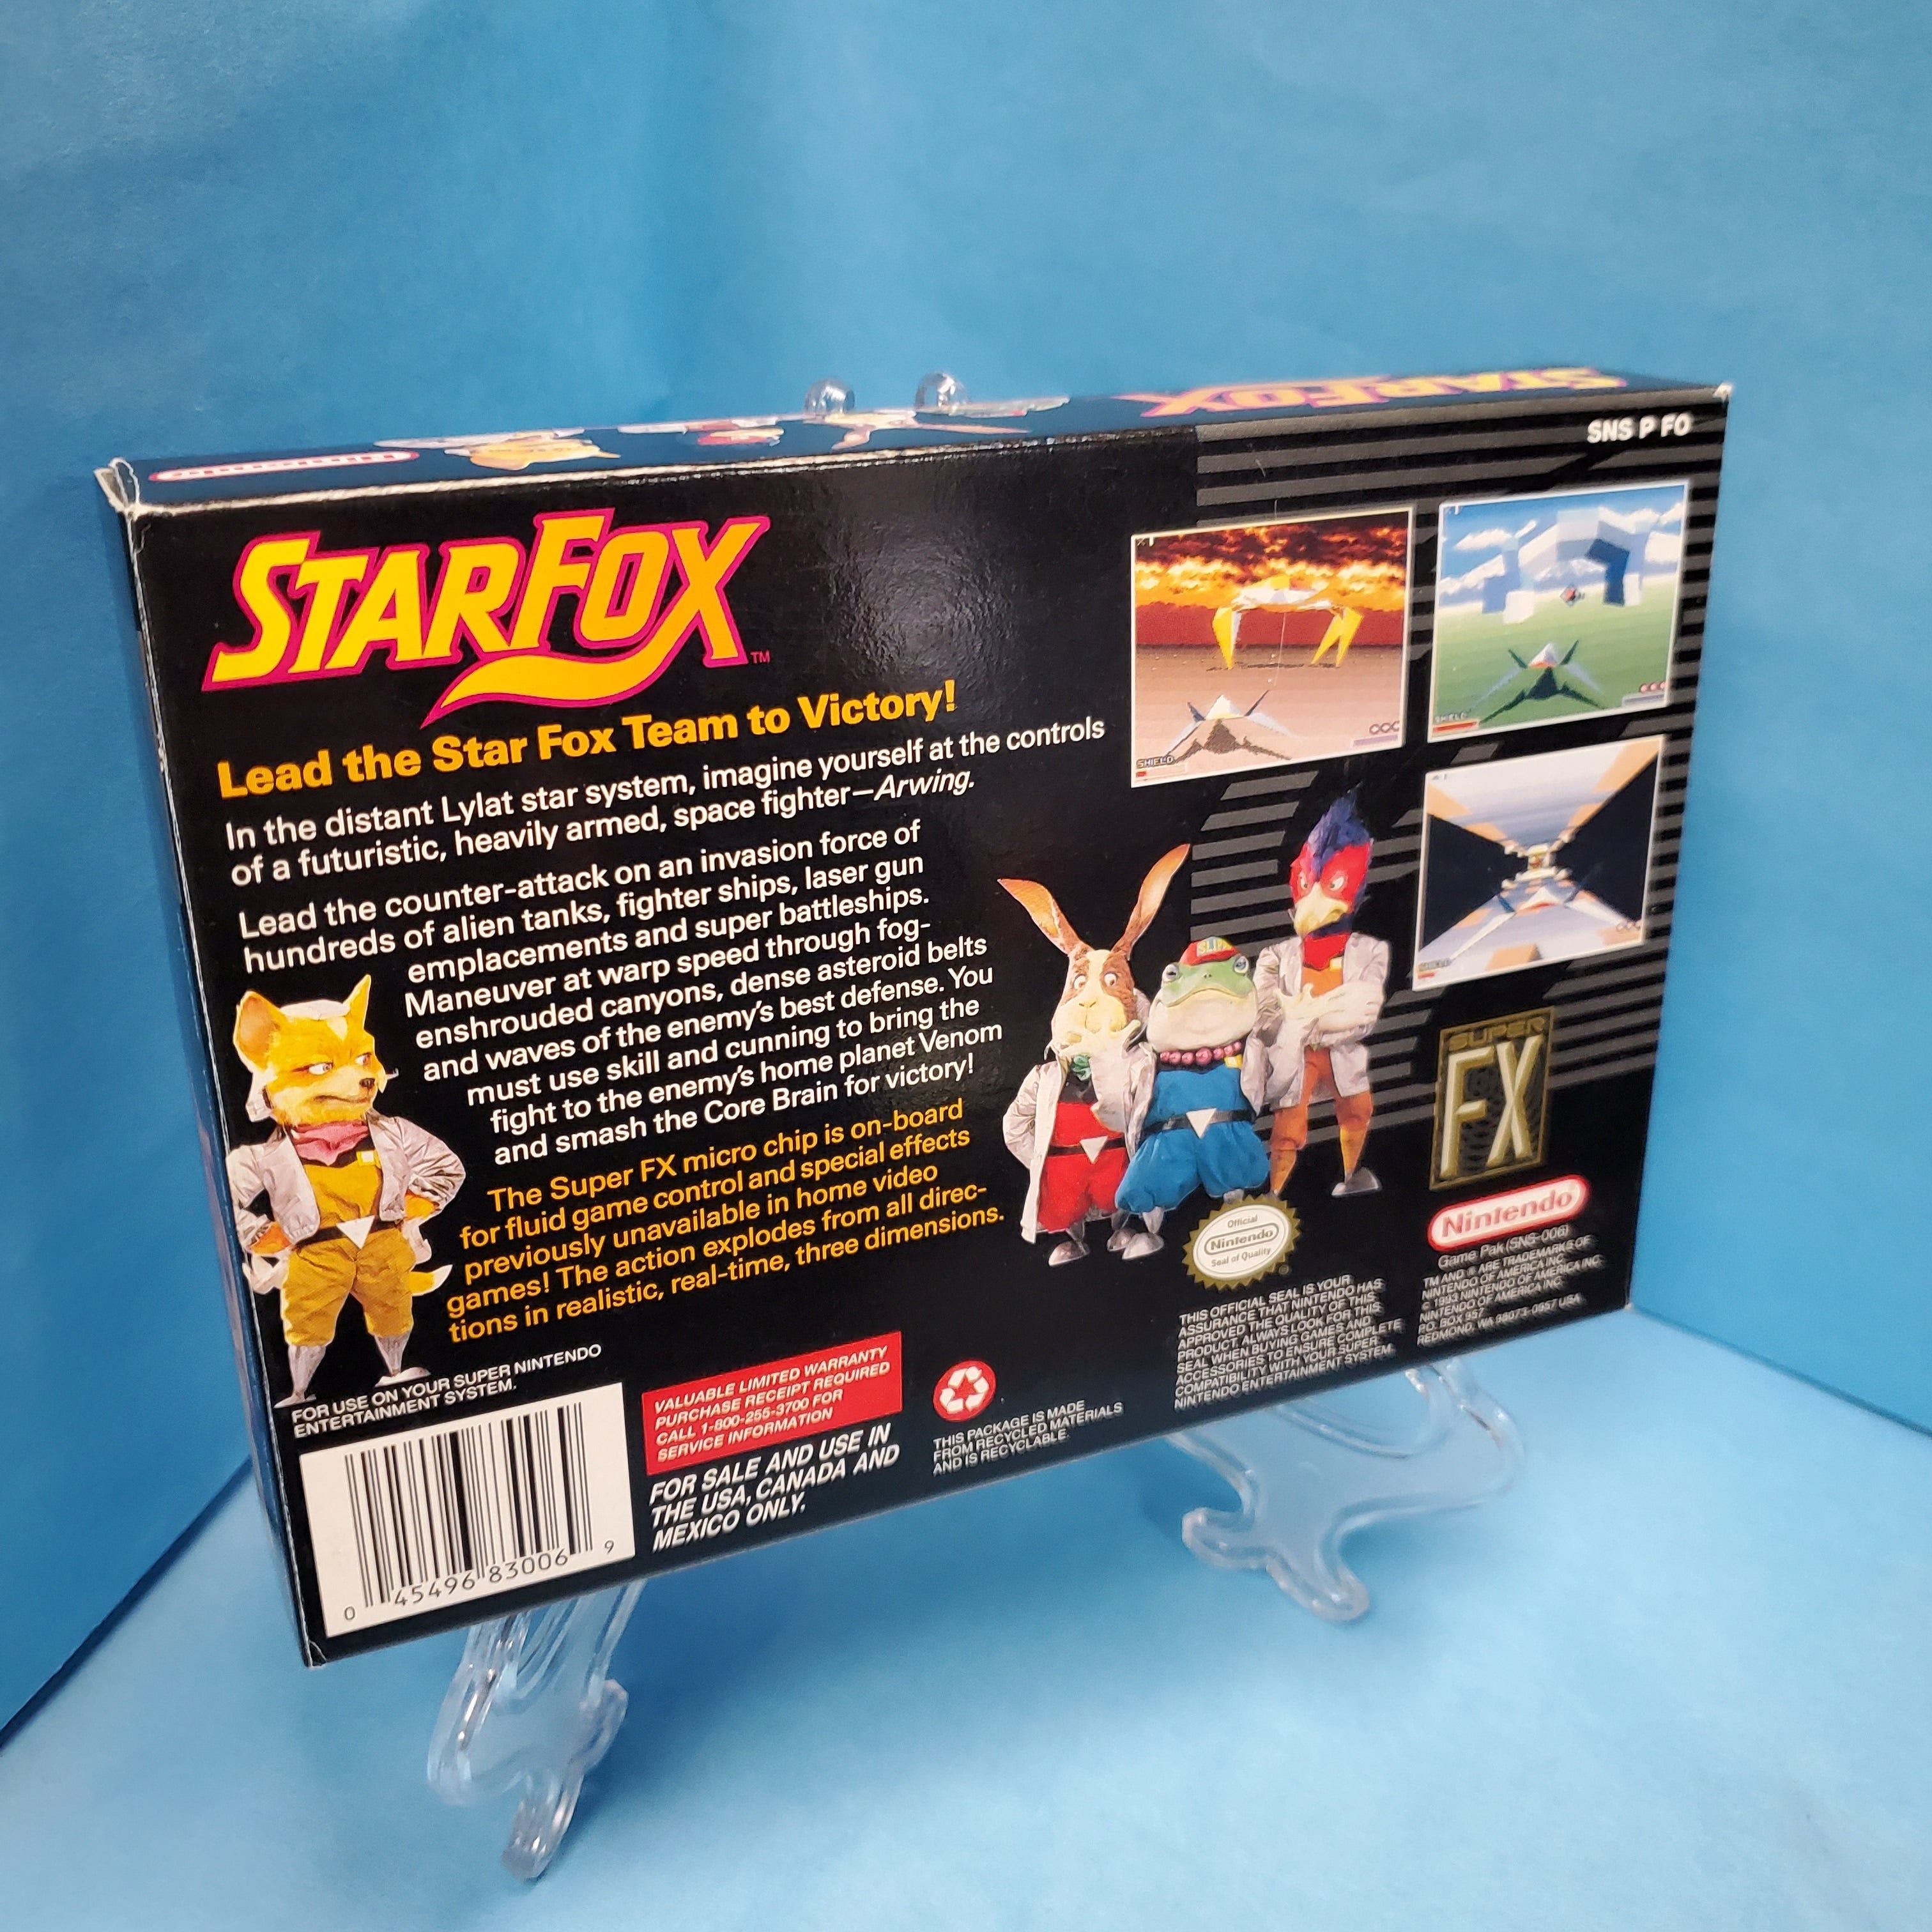 SNES - Star Fox (Complete in Box / A+ / With Manual)